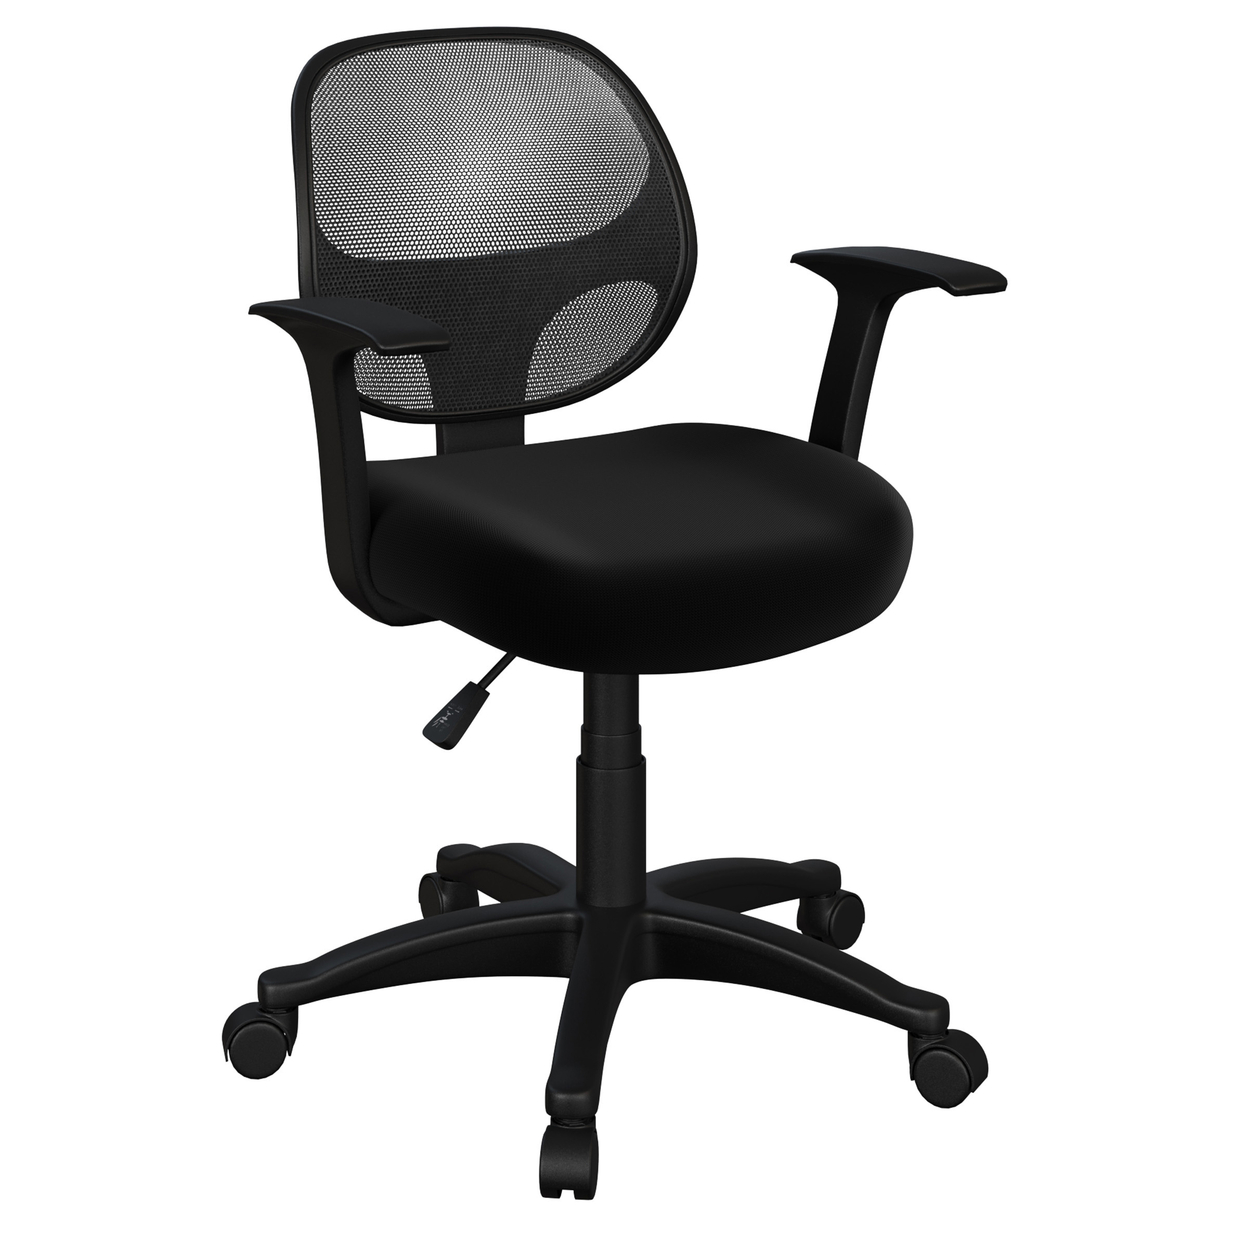 Office Chair Adjustable Height Computer Chair With Wheels Curved Back Foam Seat